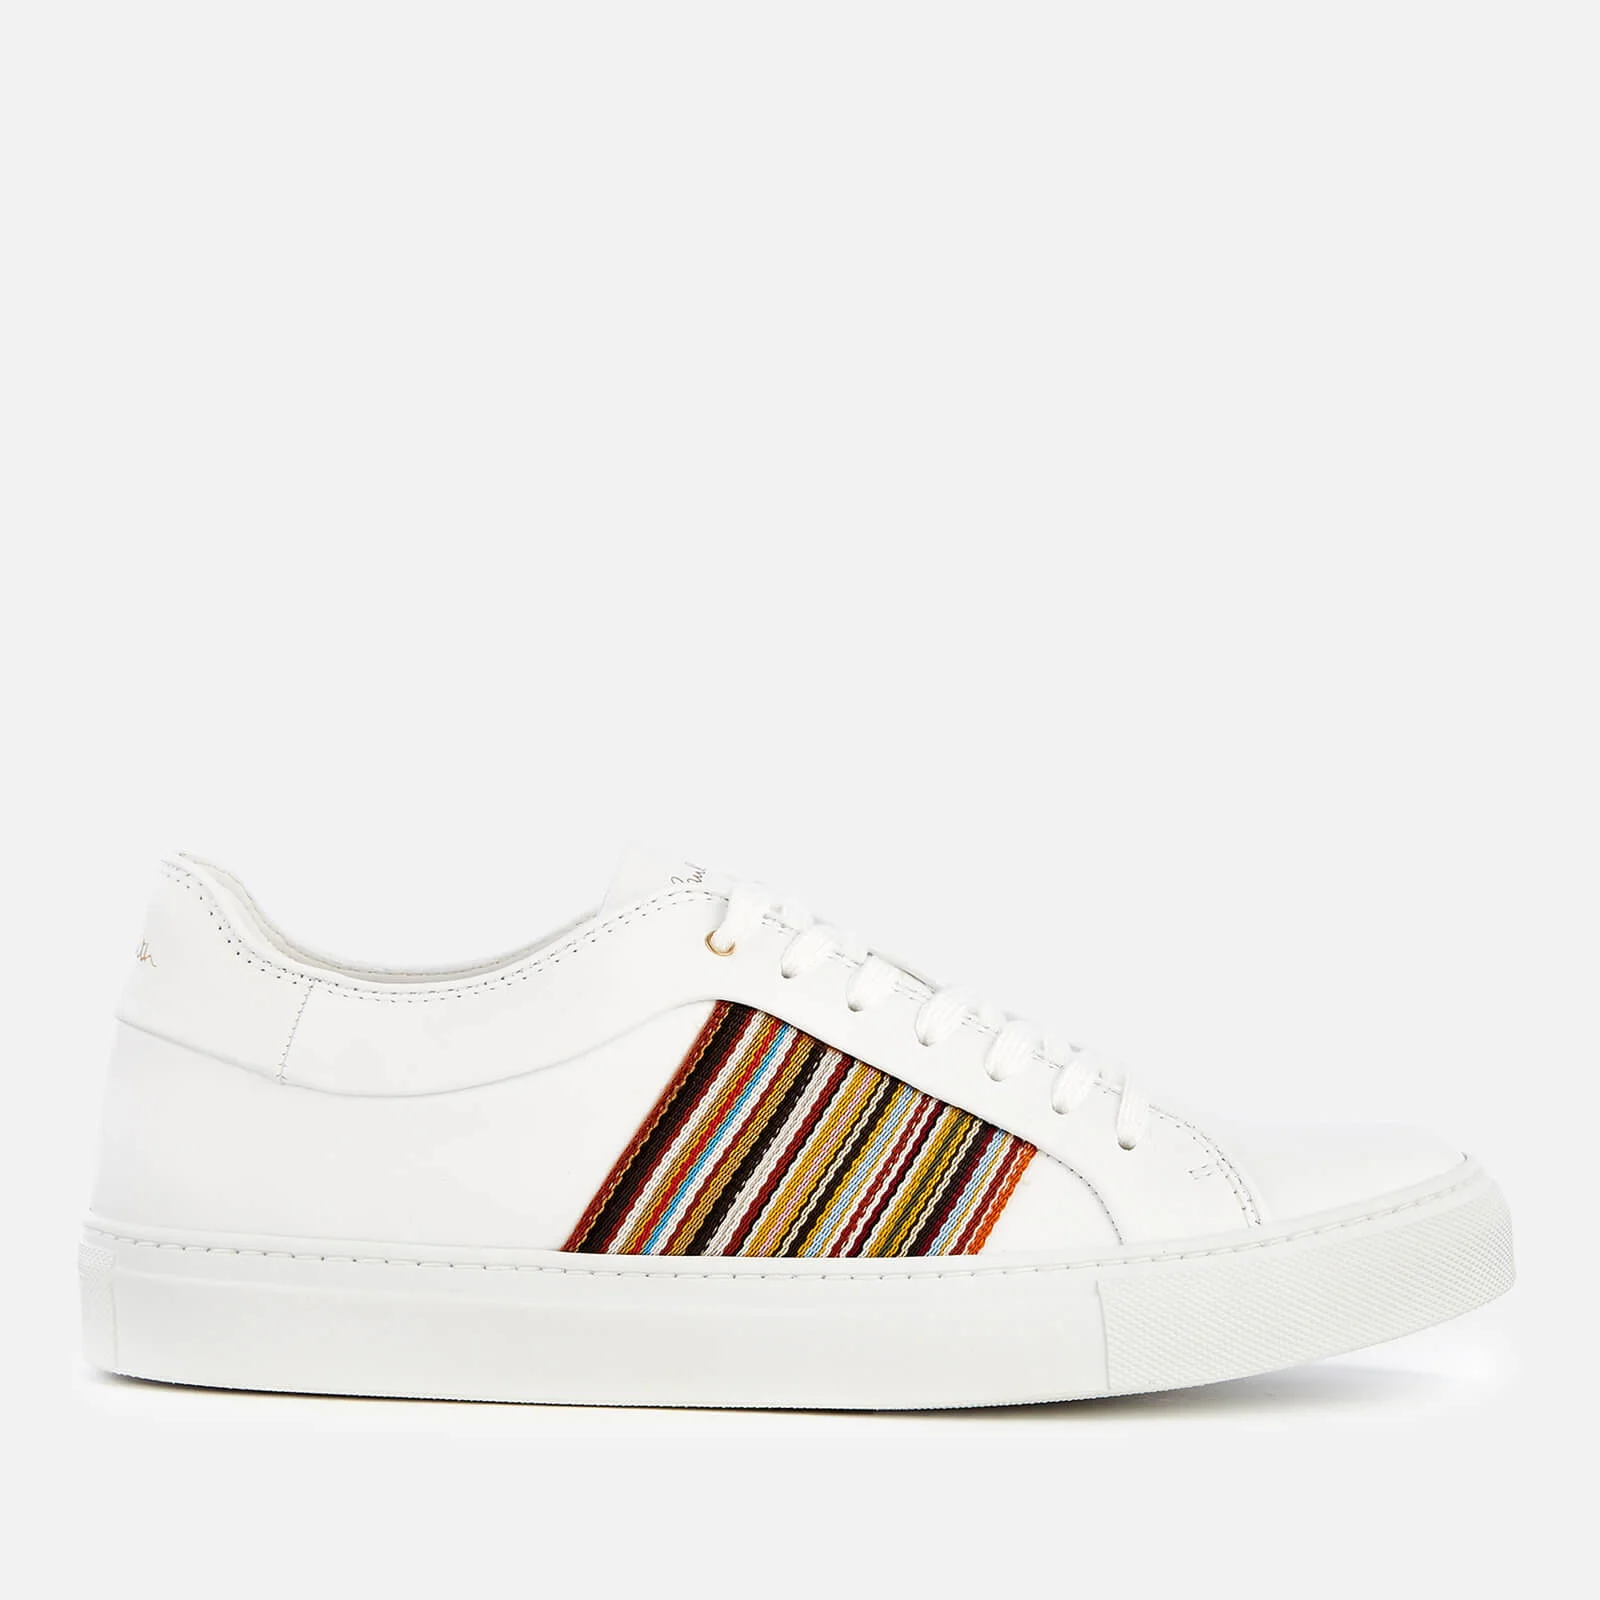 Paul Smith Men's Ivo Leather Cupsole Trainers - White Multistripe Image 1